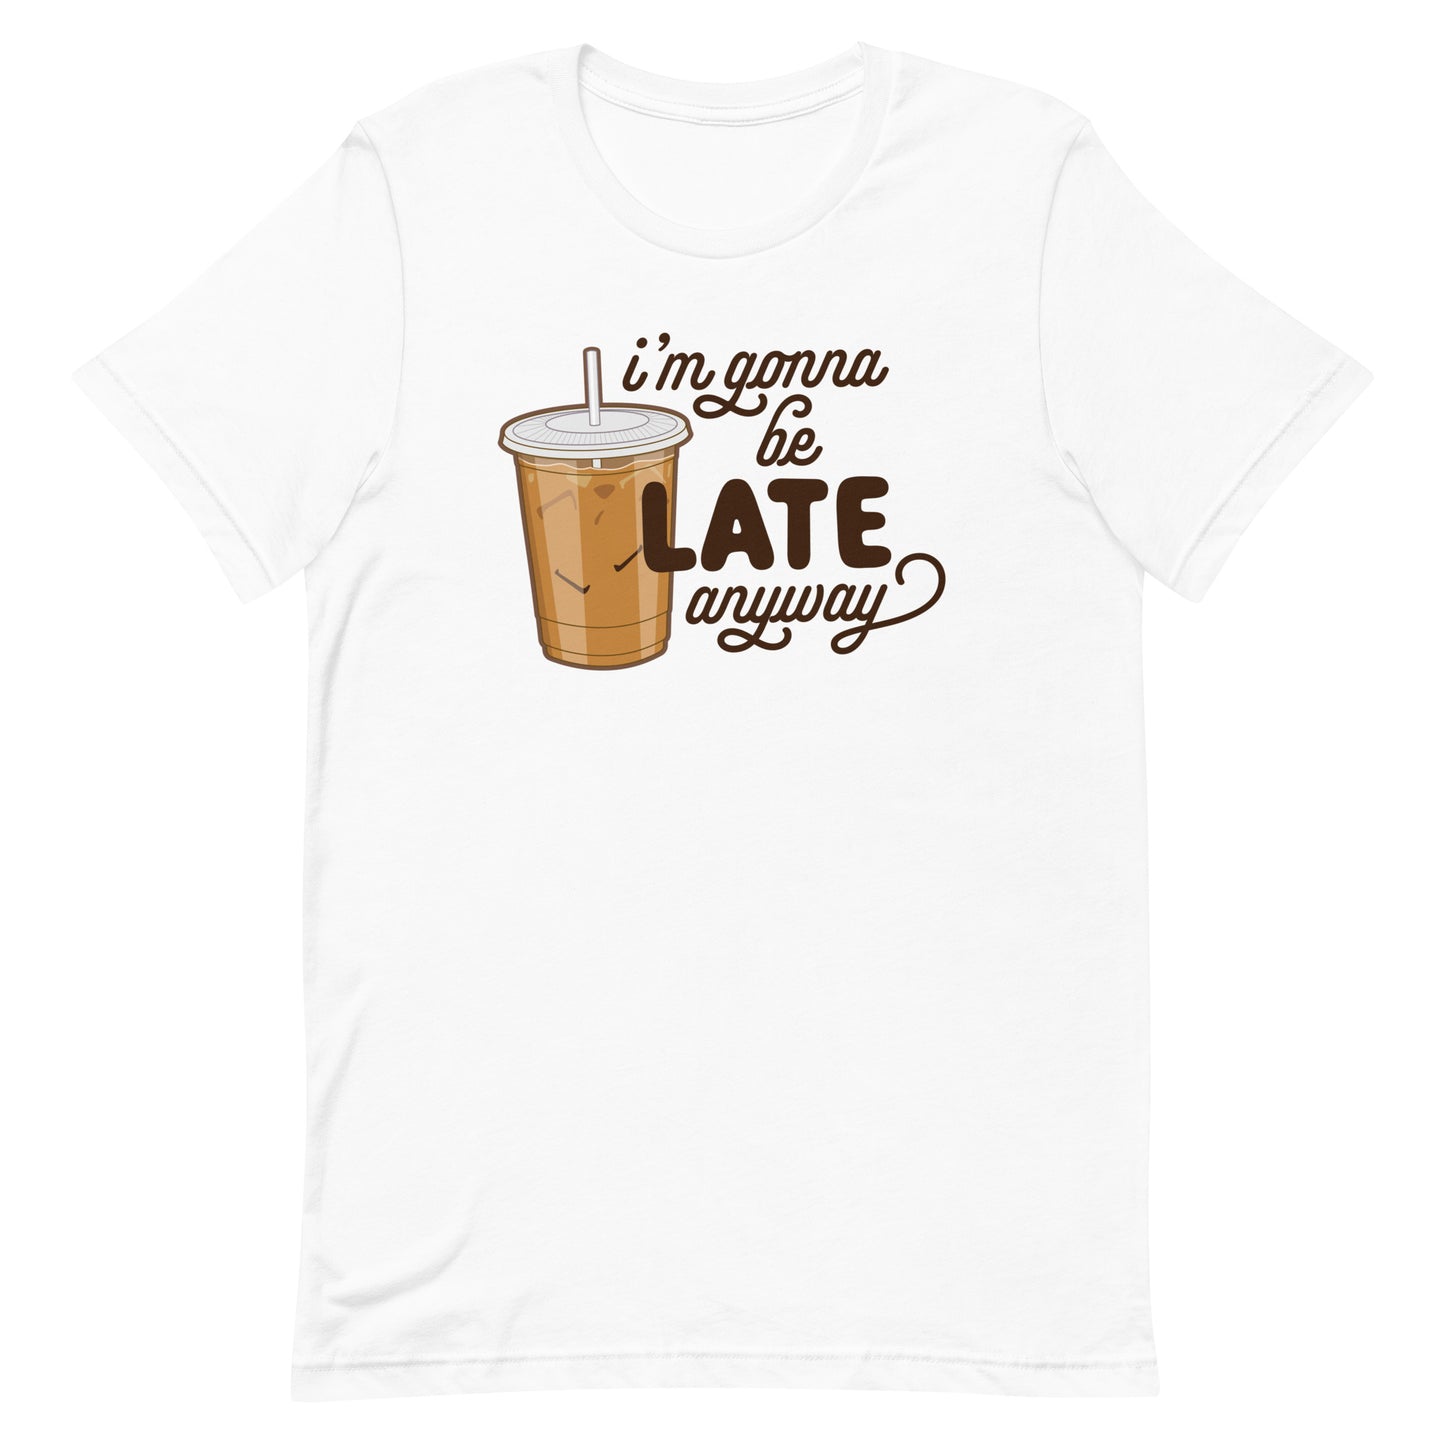 A white crewneck t-shirt featuring an illustration of iced coffee. Text next to the coffee reads "I'm gonna be LATE anyway".